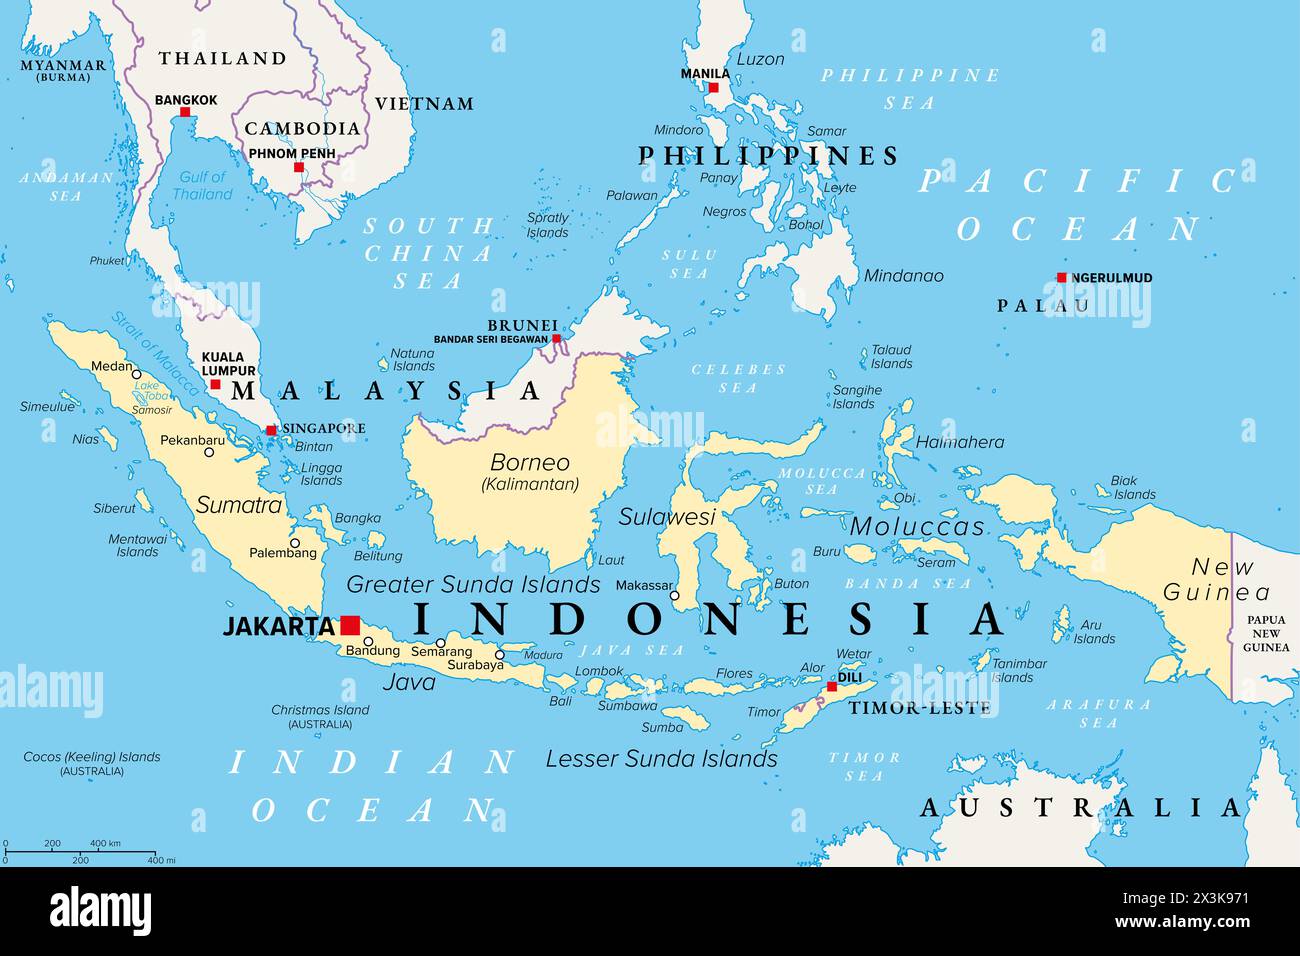 Indonesia, a country in Southeast Asia and Oceania, political map. With largest islands Sumatra, Java, Sulawesi, and parts of Borneo und New Guinea. Stock Photo